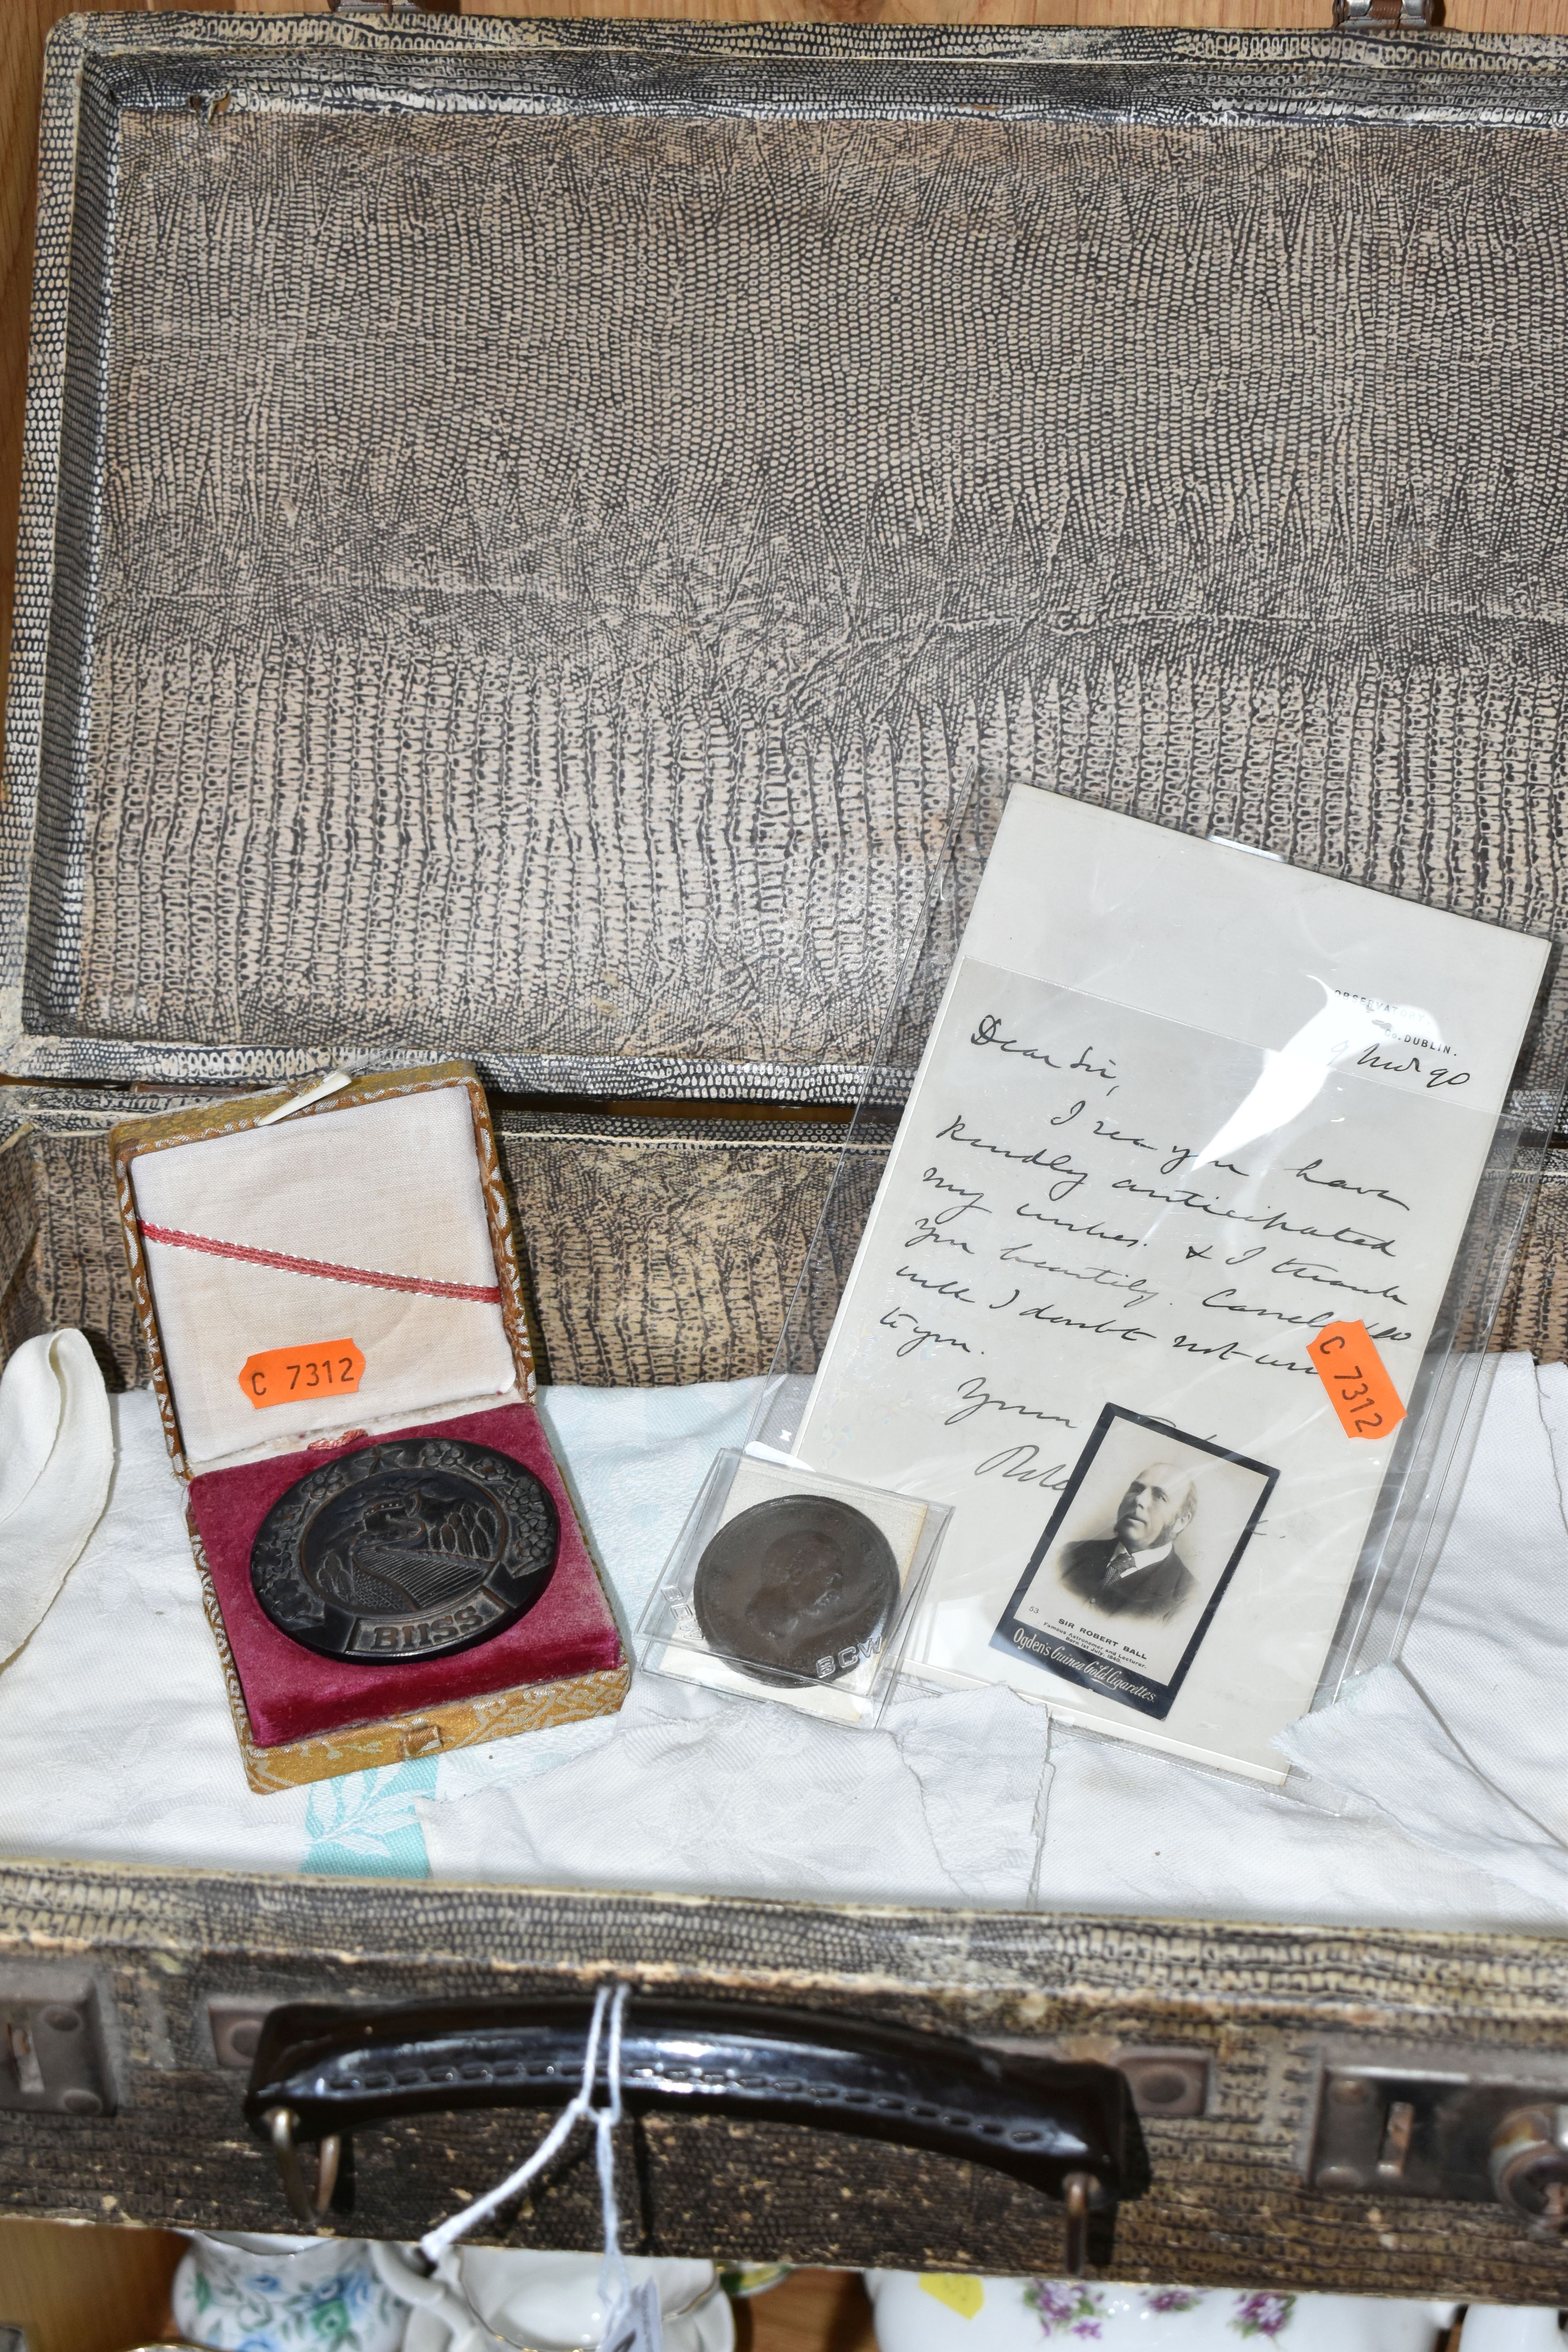 A SMALL VINTAGE SUITCASE CONTAINING A BRONZE GEORGE WASHINGTON MEDAL DESIGNED BY VOLTAIRE, 1778